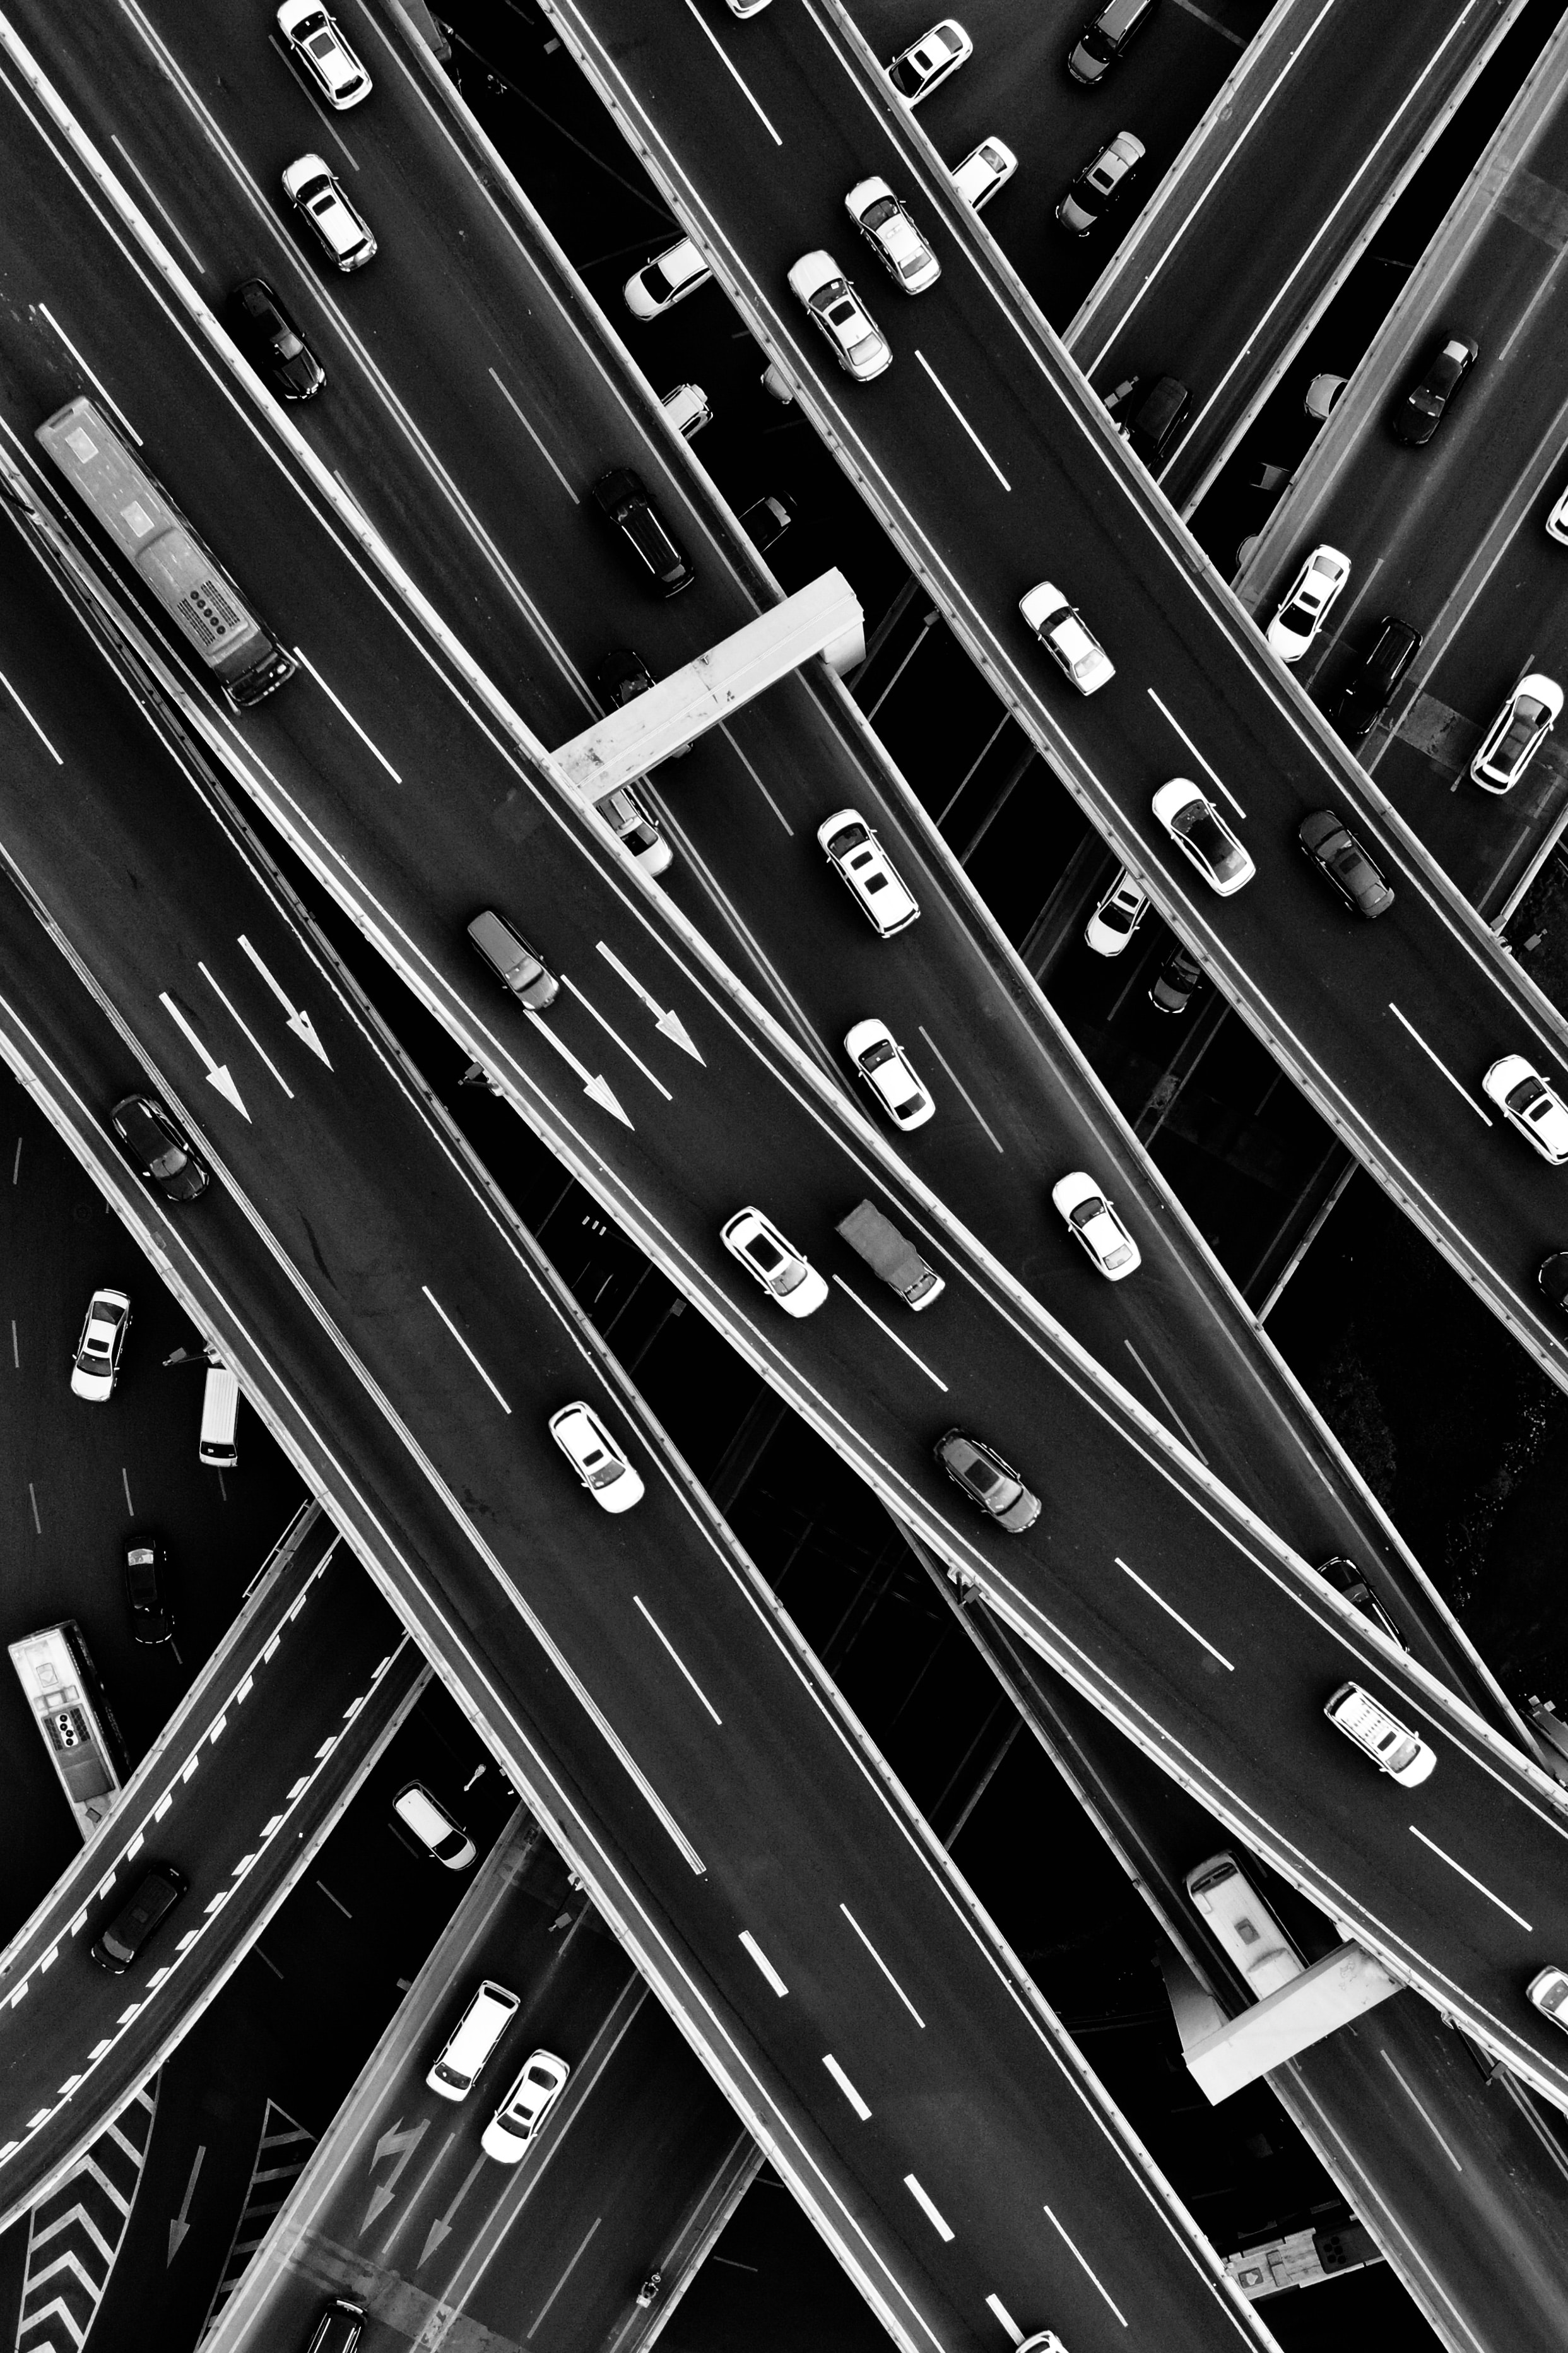 interchange, chb, cars, cities, view from above, traffic, movement, bw, transport interchange